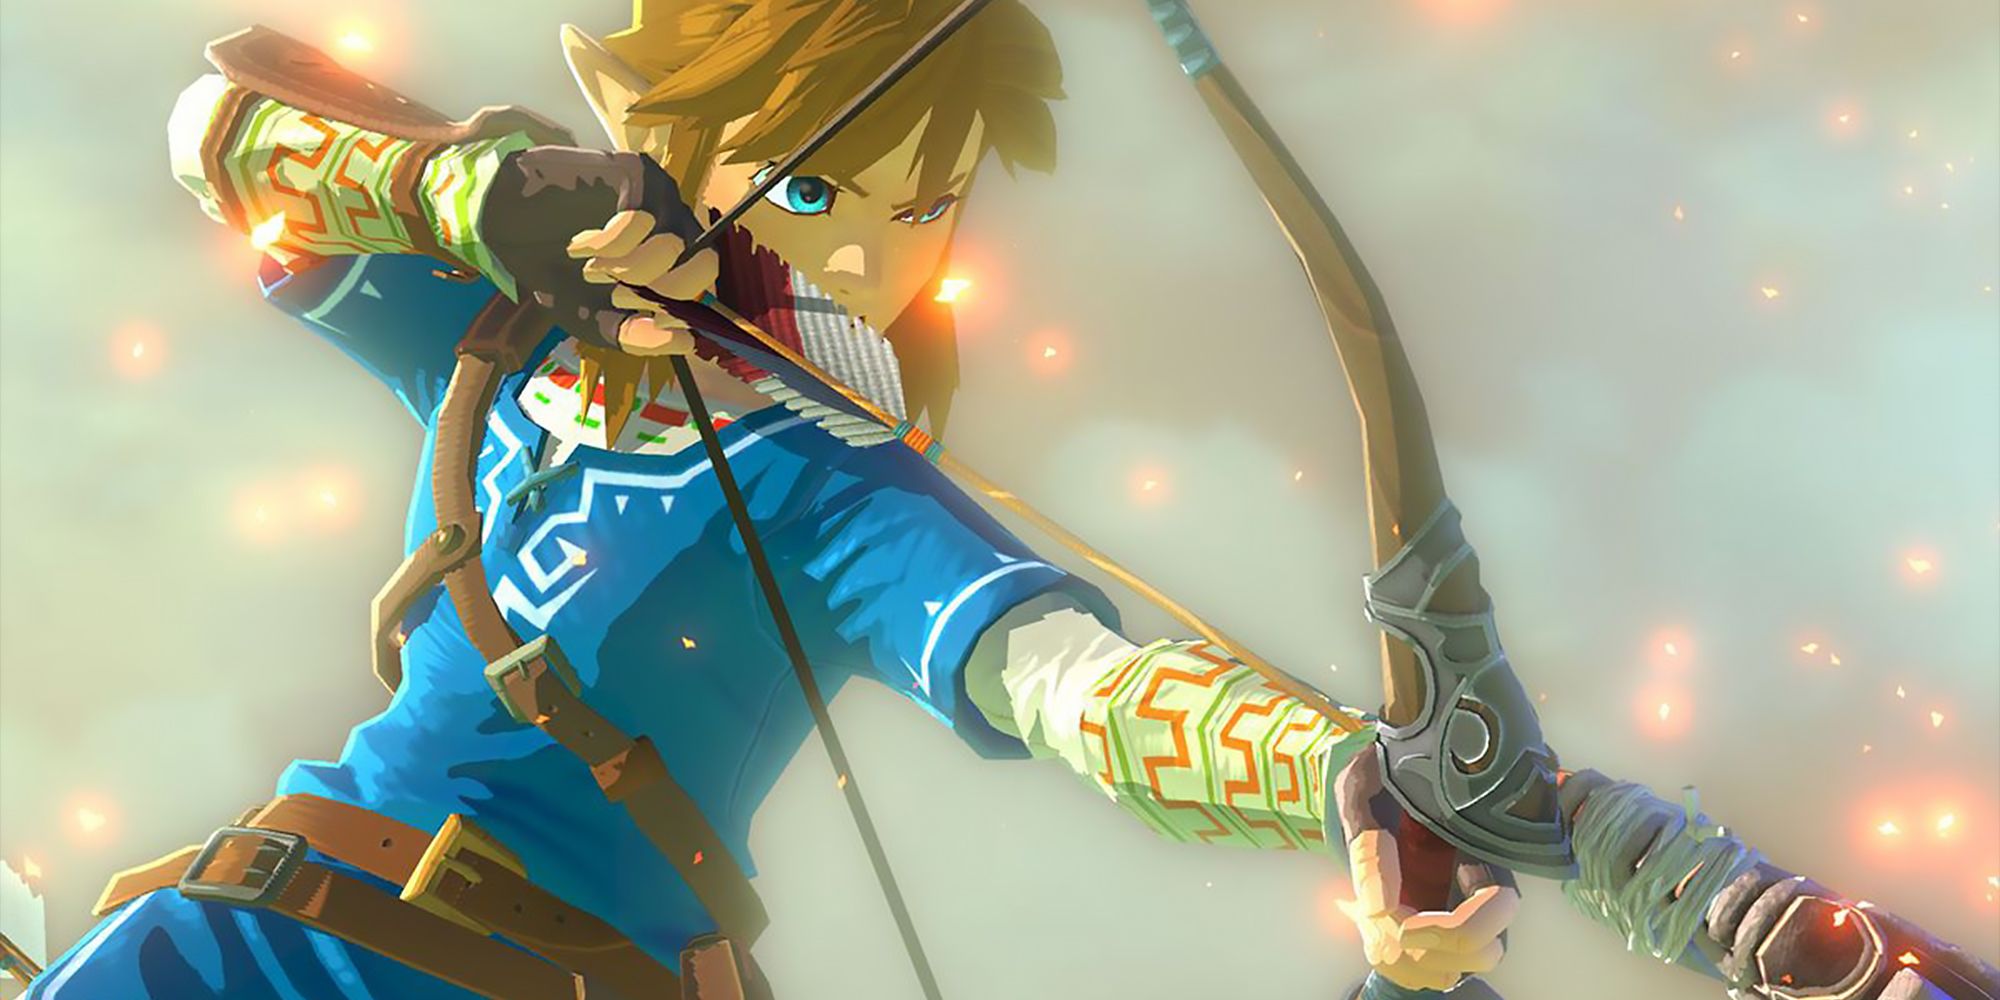 Sony's Live-Action Legend of Zelda Movie Gets an Exciting Update